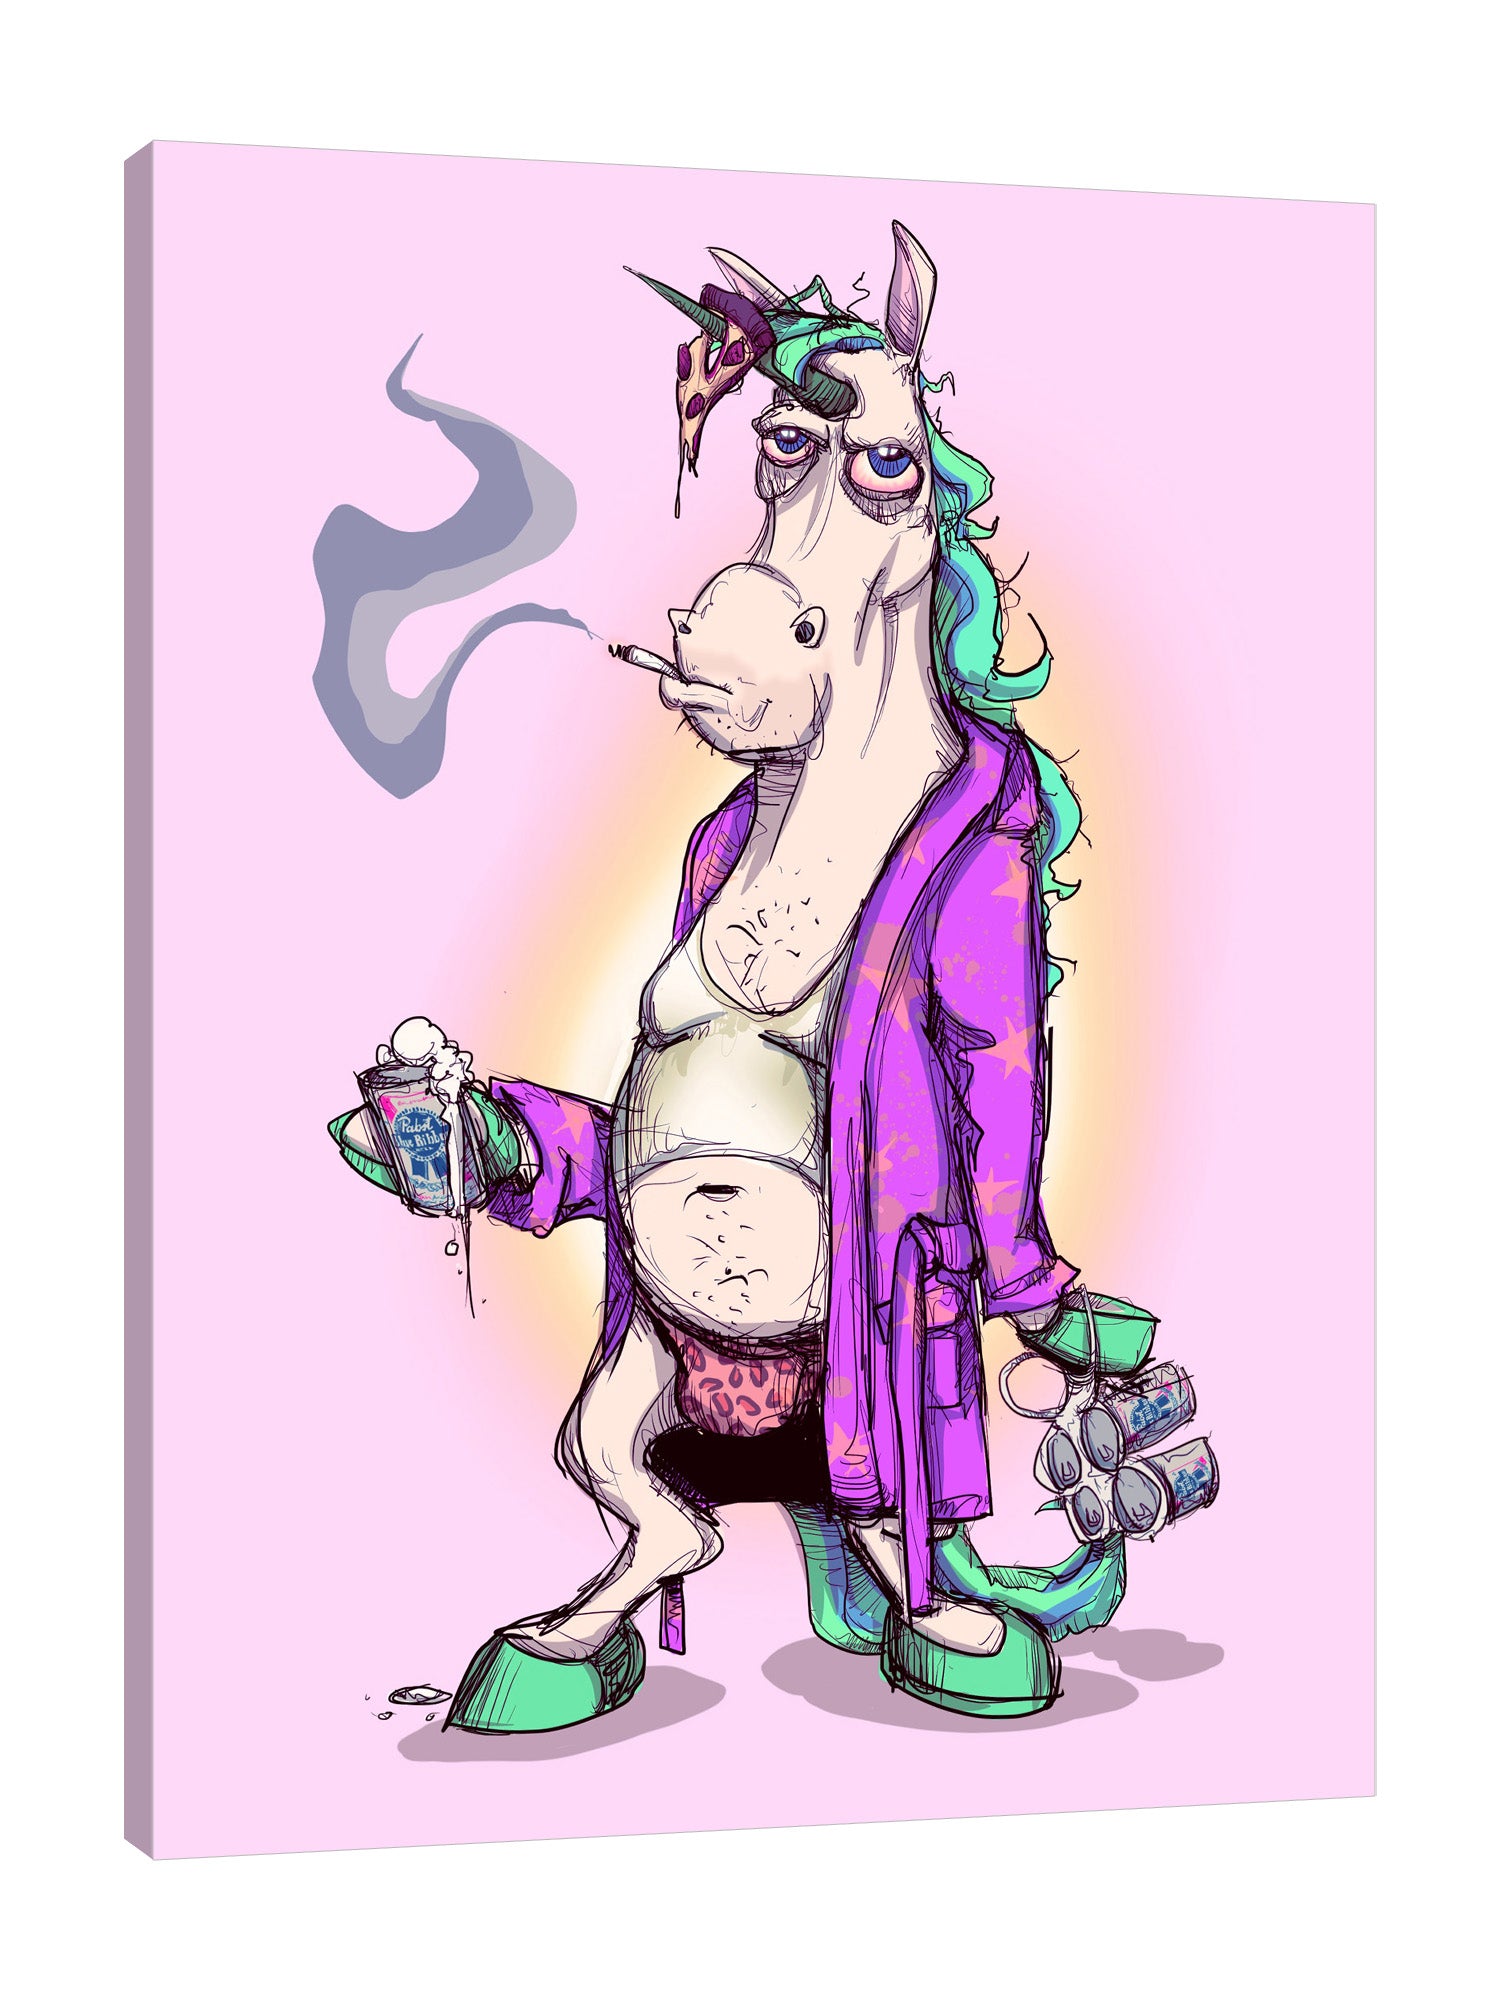 Ludwig-Van-Bacon,Vertical,3X4,Modern & Contemporary,Animals,Humor,People,Entertainment,animals,animal,horses,horse,smoking,smoke,drinking,drink,drinks,don‰۪t give a fu,cans,can,bath robe,robe,Nude Peach,Yellow,Gray,Charcoal Gray,Pale Green,Blue,Purple